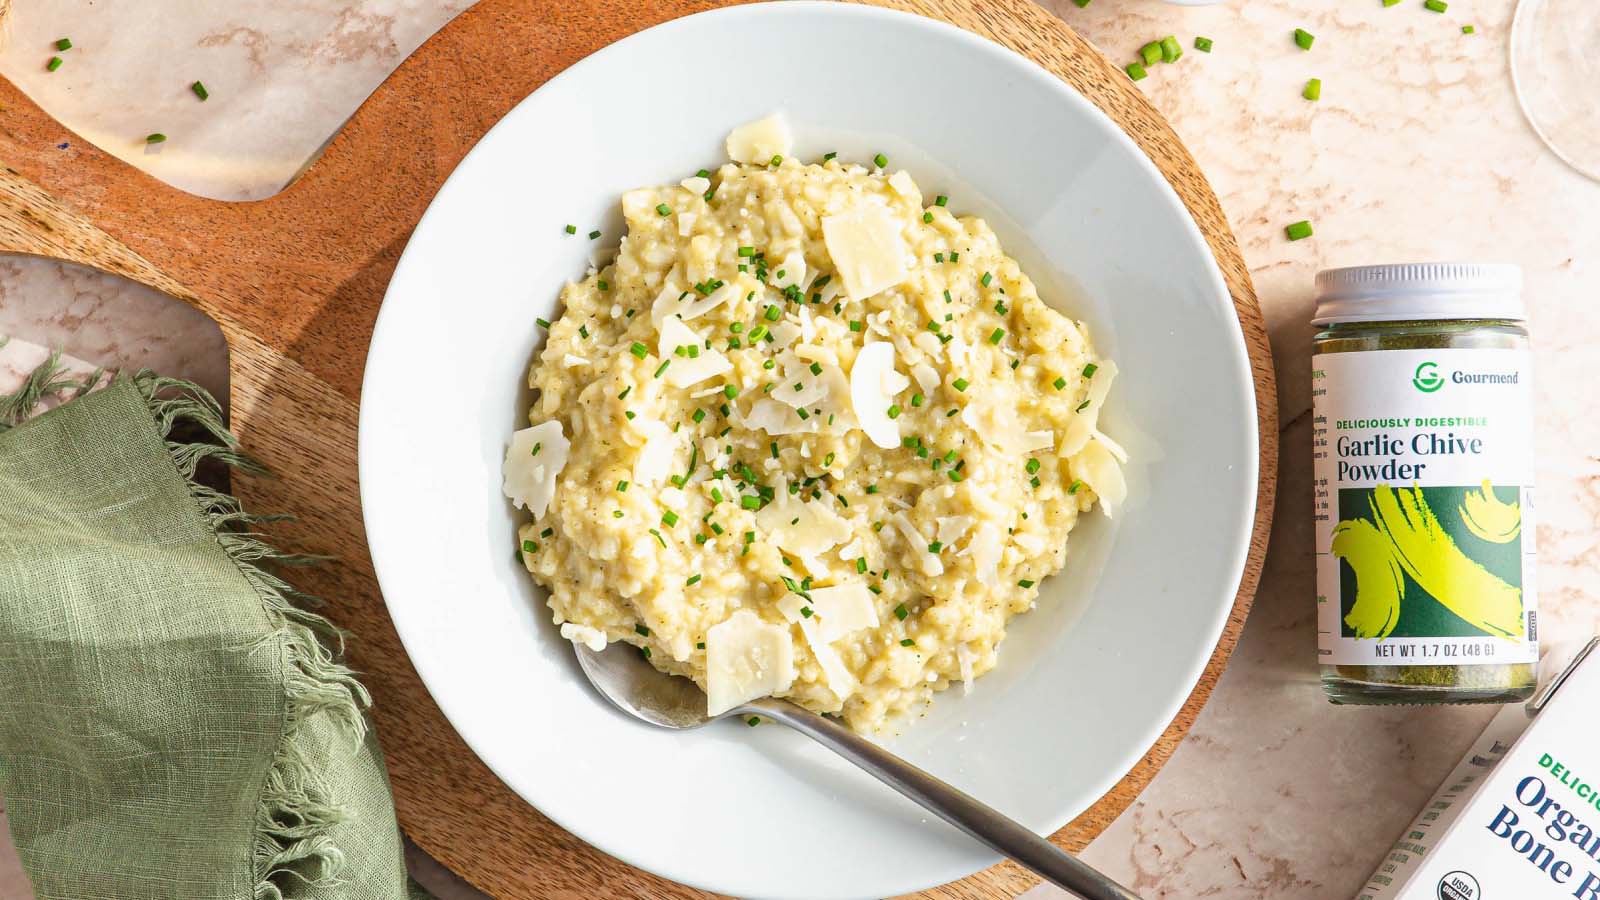 Gourmend recipe for low fodmap risotto